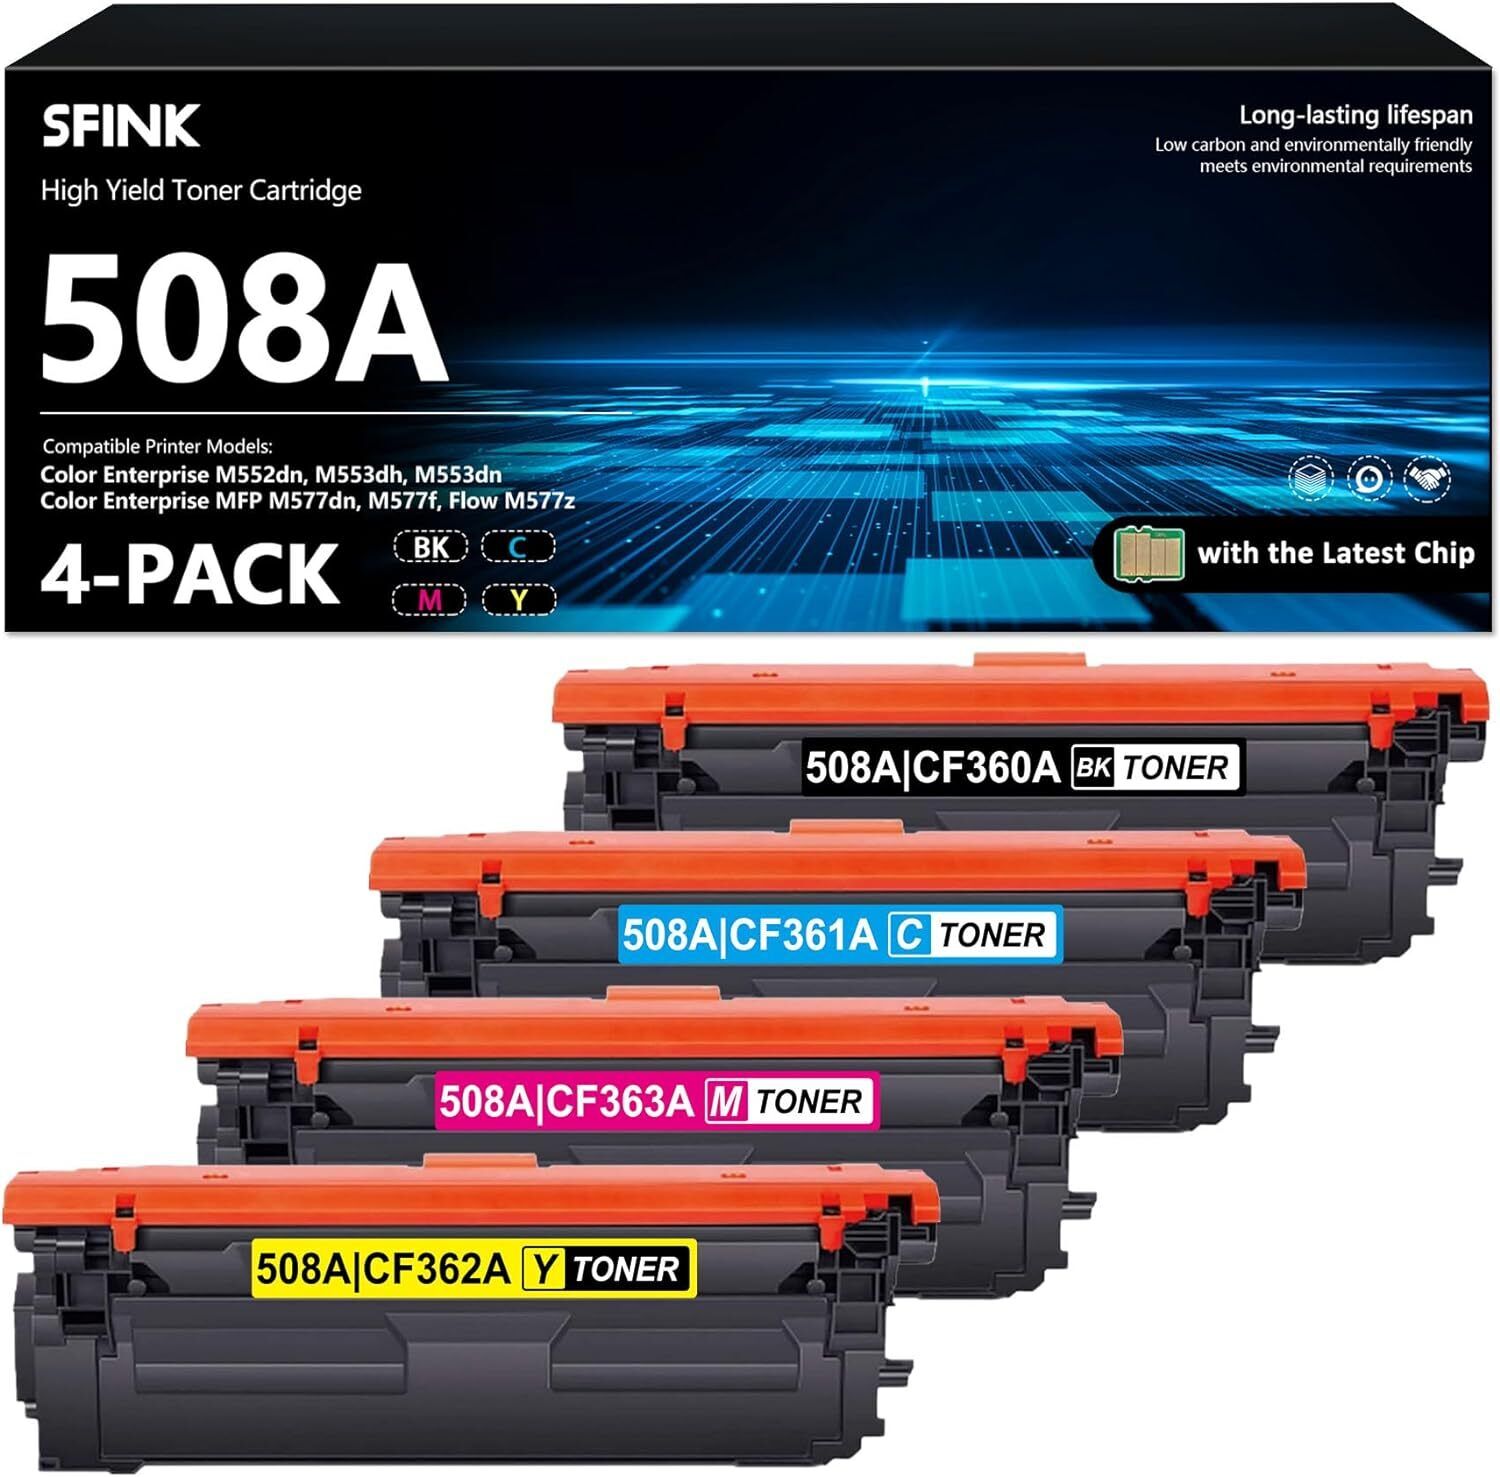 508A|CF360A Toner Cartridge 4 PK with Chip Replacement for HP M552dn M553dh